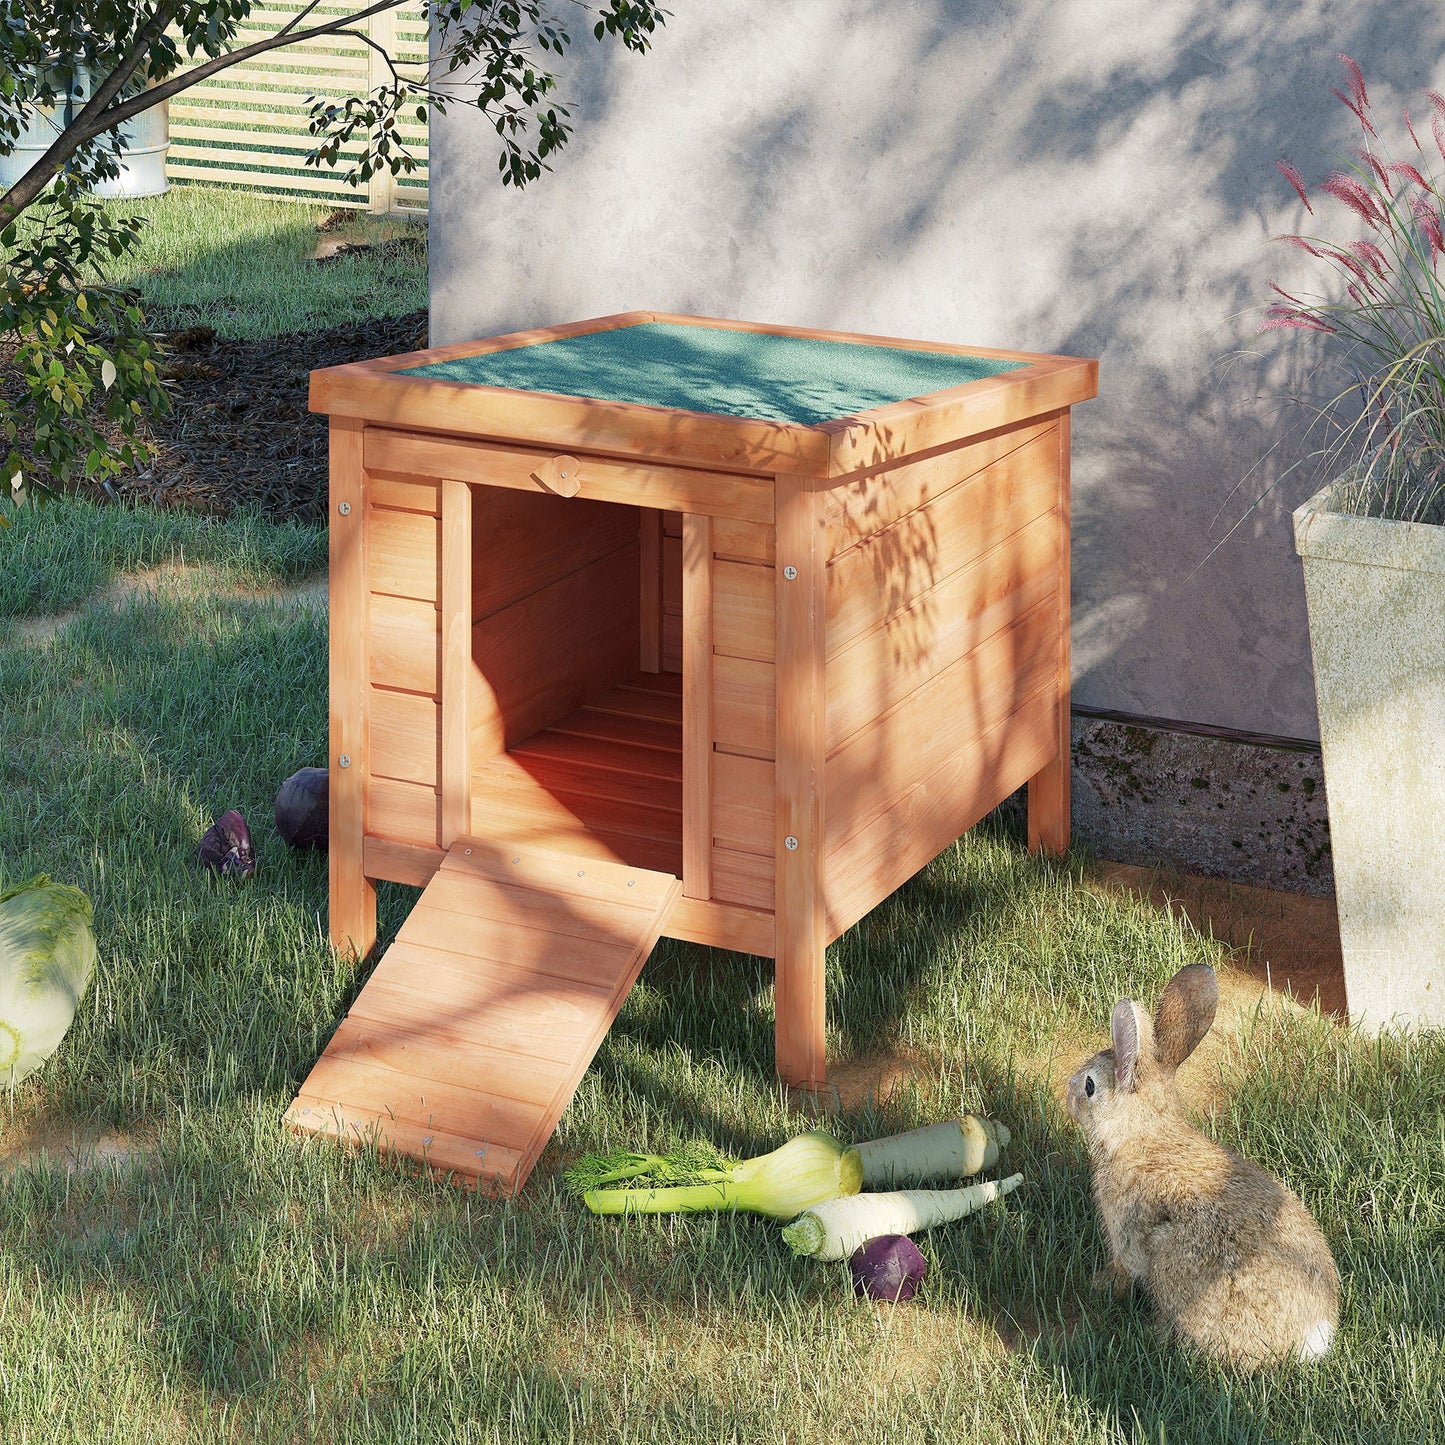 -PawHut Small Wooden Rabbit House Hutch, Rabbit Cage with Openable & Waterproof Roof, Bunny Cage, Guinea Pig House for Indoor Outdoor, Natural - Outdoor Style Company